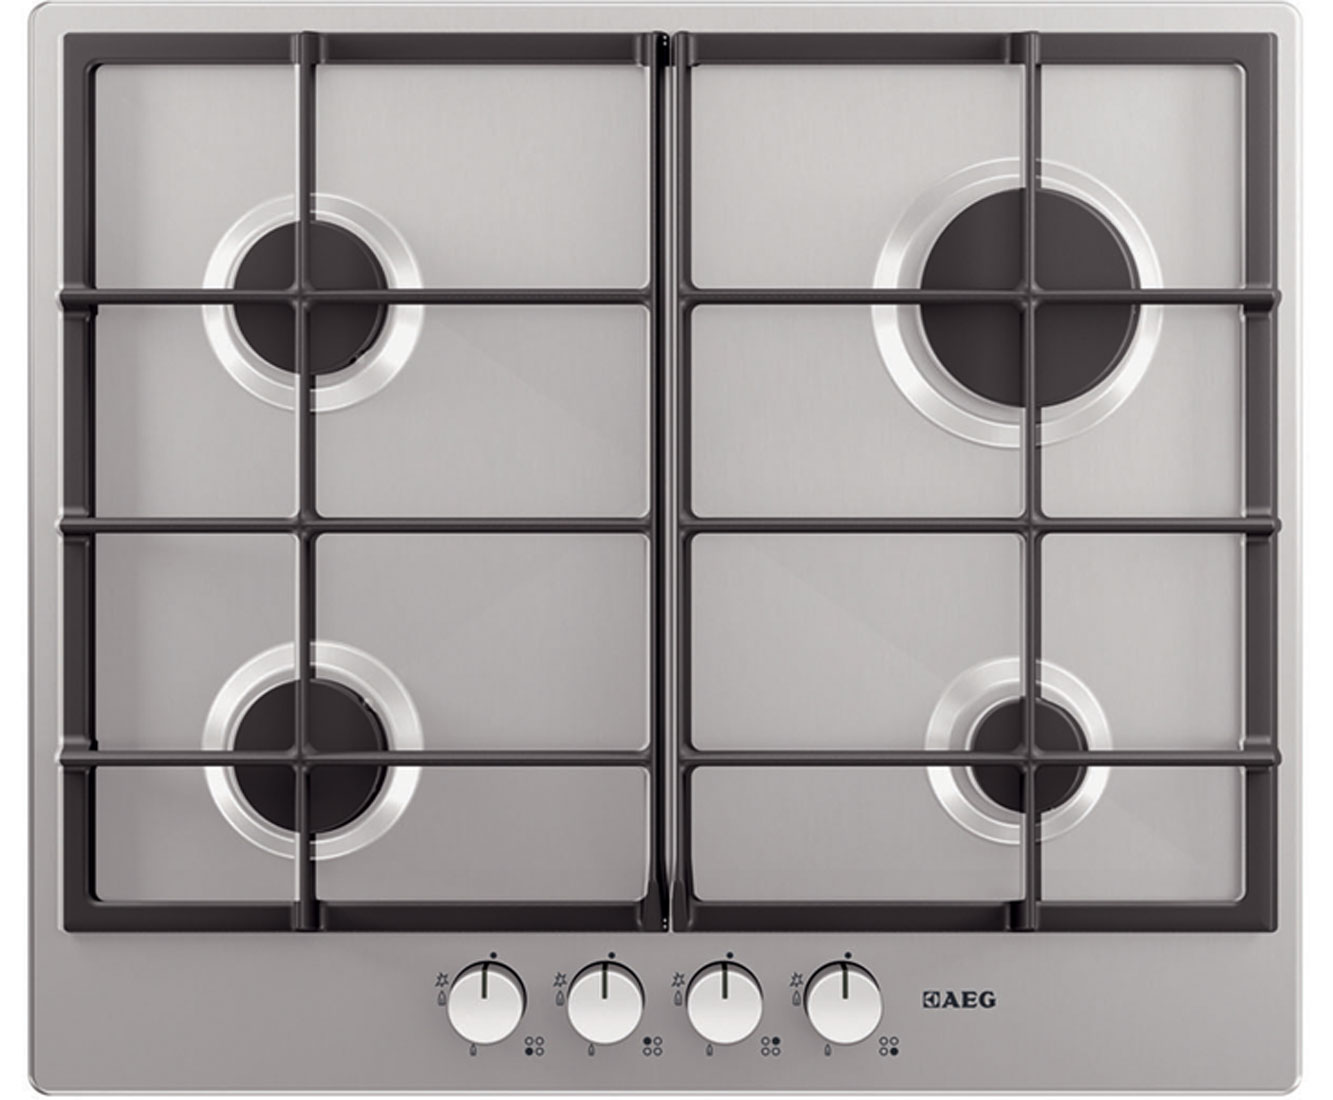 AEG Competence HG654320NM Integrated Gas Hob in Stainless Steel